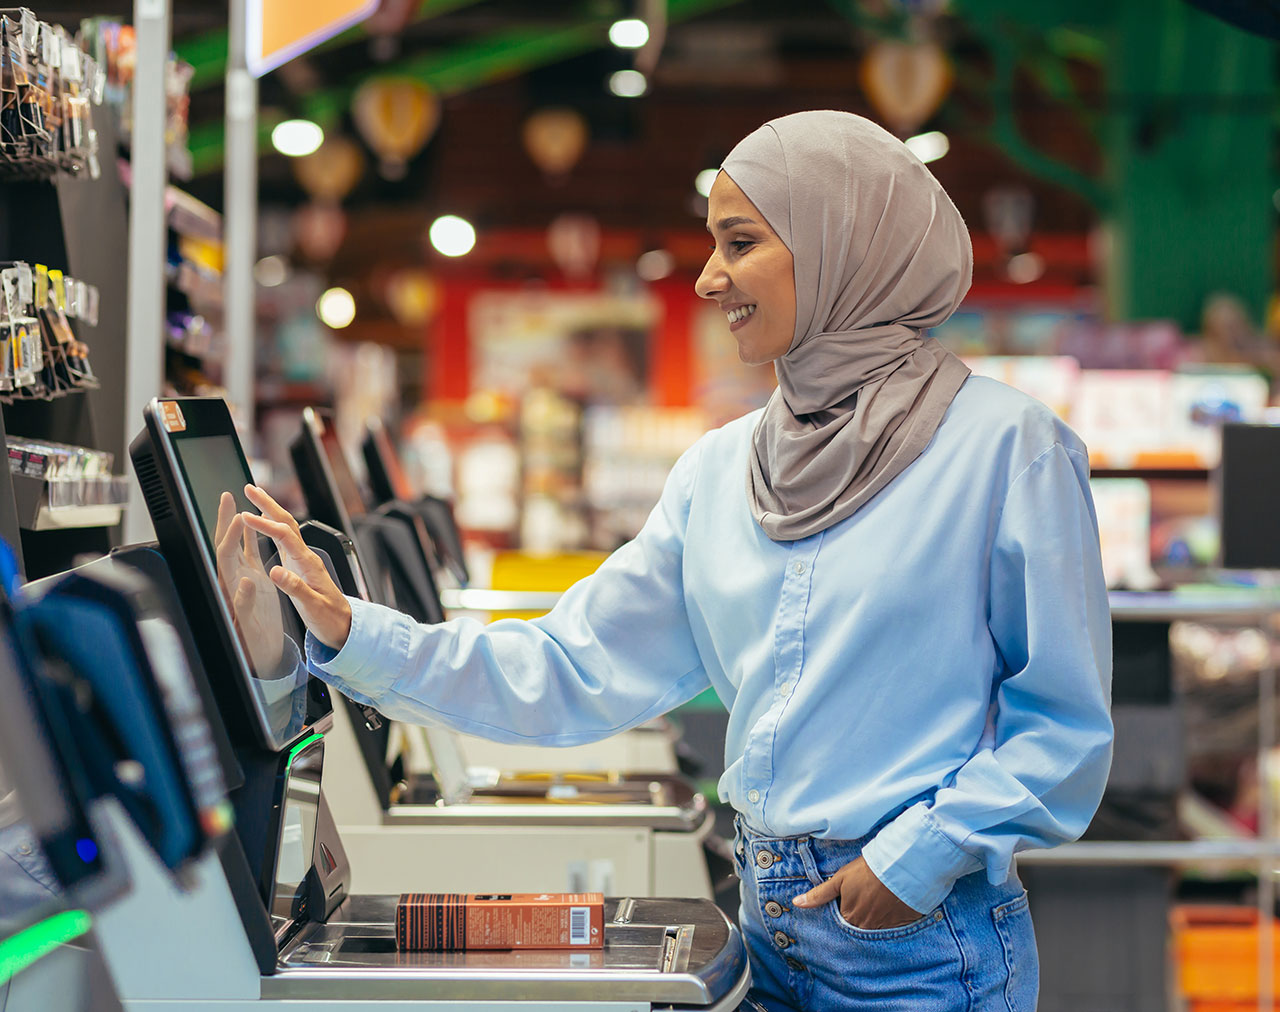 A smiling Muslim woman checks her item out at a self-checkout lane in a store.